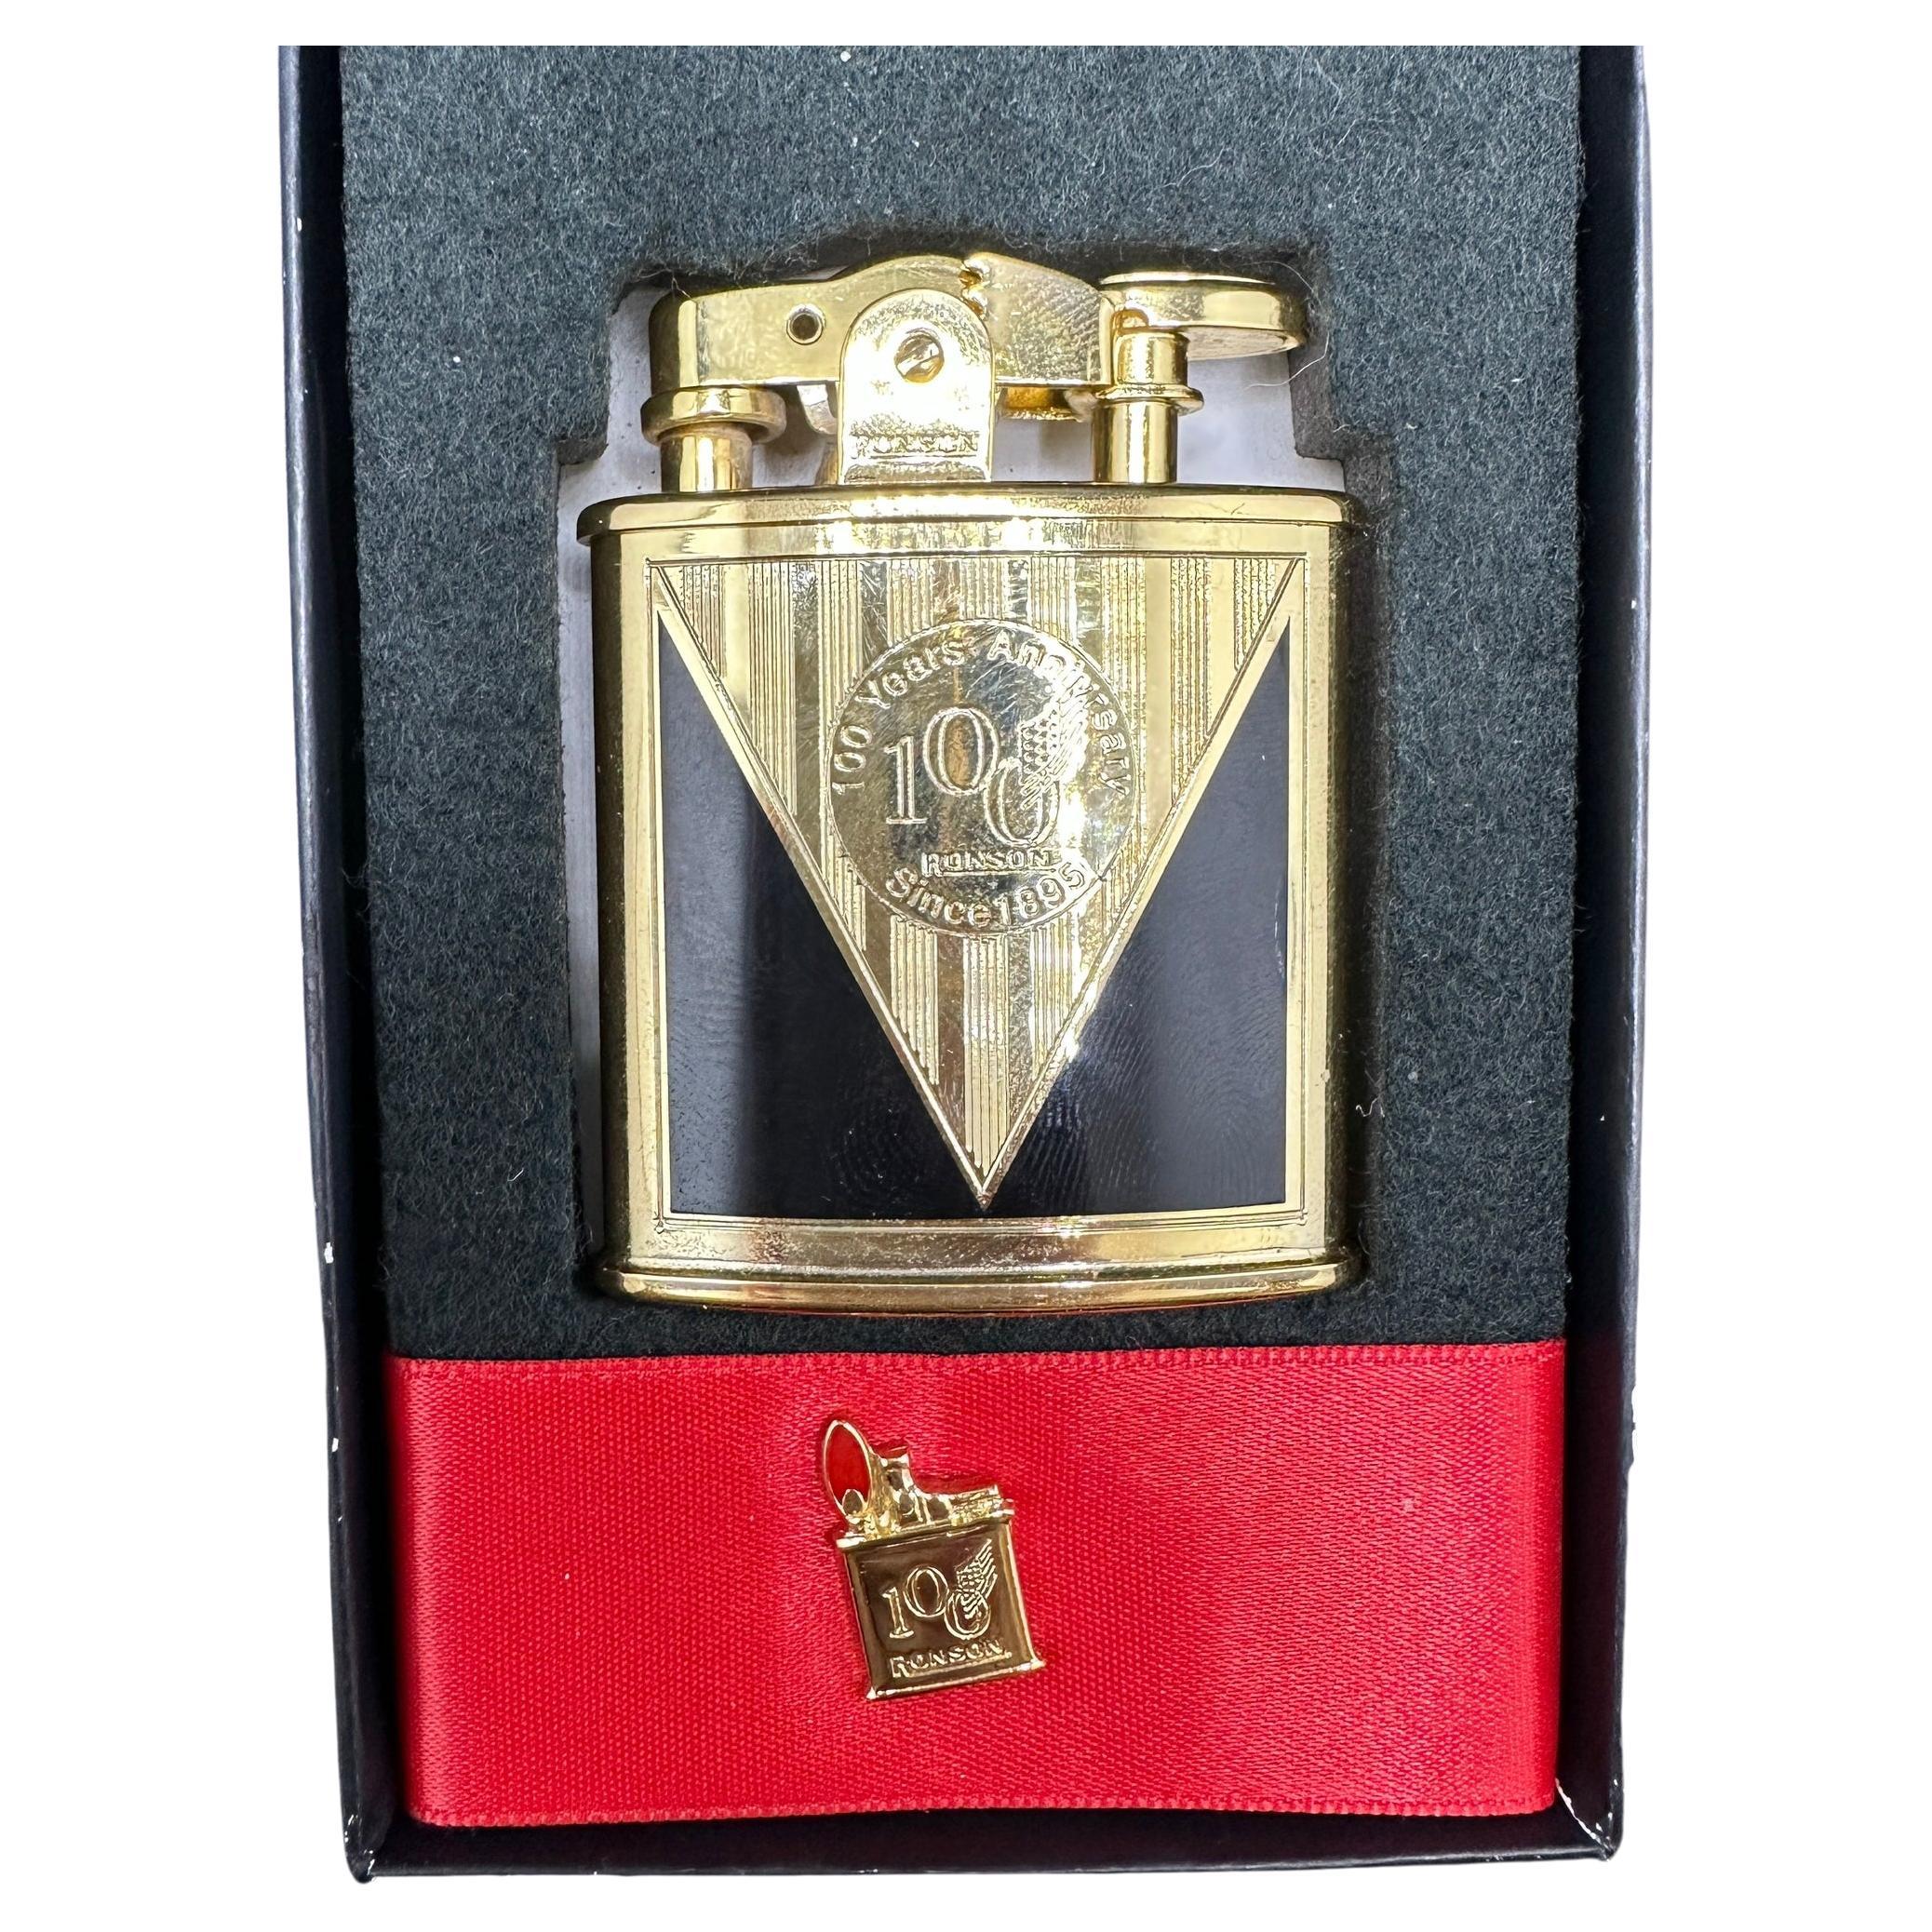 Gold Plated “1943” Ronson Lighter, Rare Limited 100 Year Anniversary Edition
Ronson Lighter
Gold Plated 
Circa “1943” Ronson Lighter Limited 100 year Anniversary edition 
This lighter comes in the original 100 year box. 
This is a real collectors